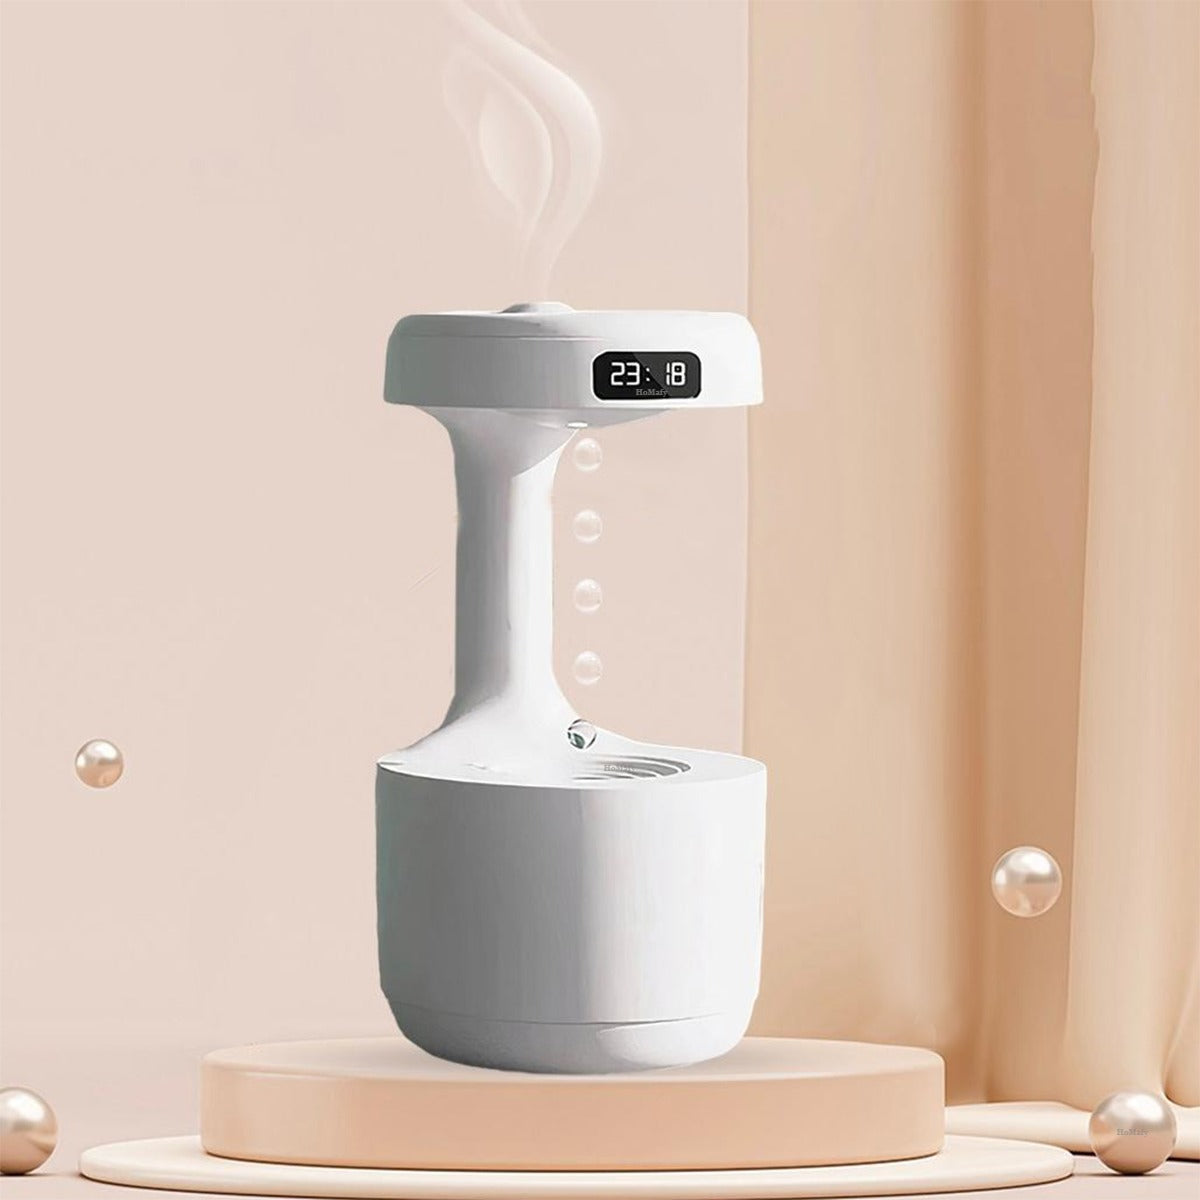 Anti Gravity Air Humidifier Anti-Gravity Water Droplet Humidifier Creative Air Aromatherapy Led Display Shutdown Protection Light Mode for Home Bedroom Office (white)